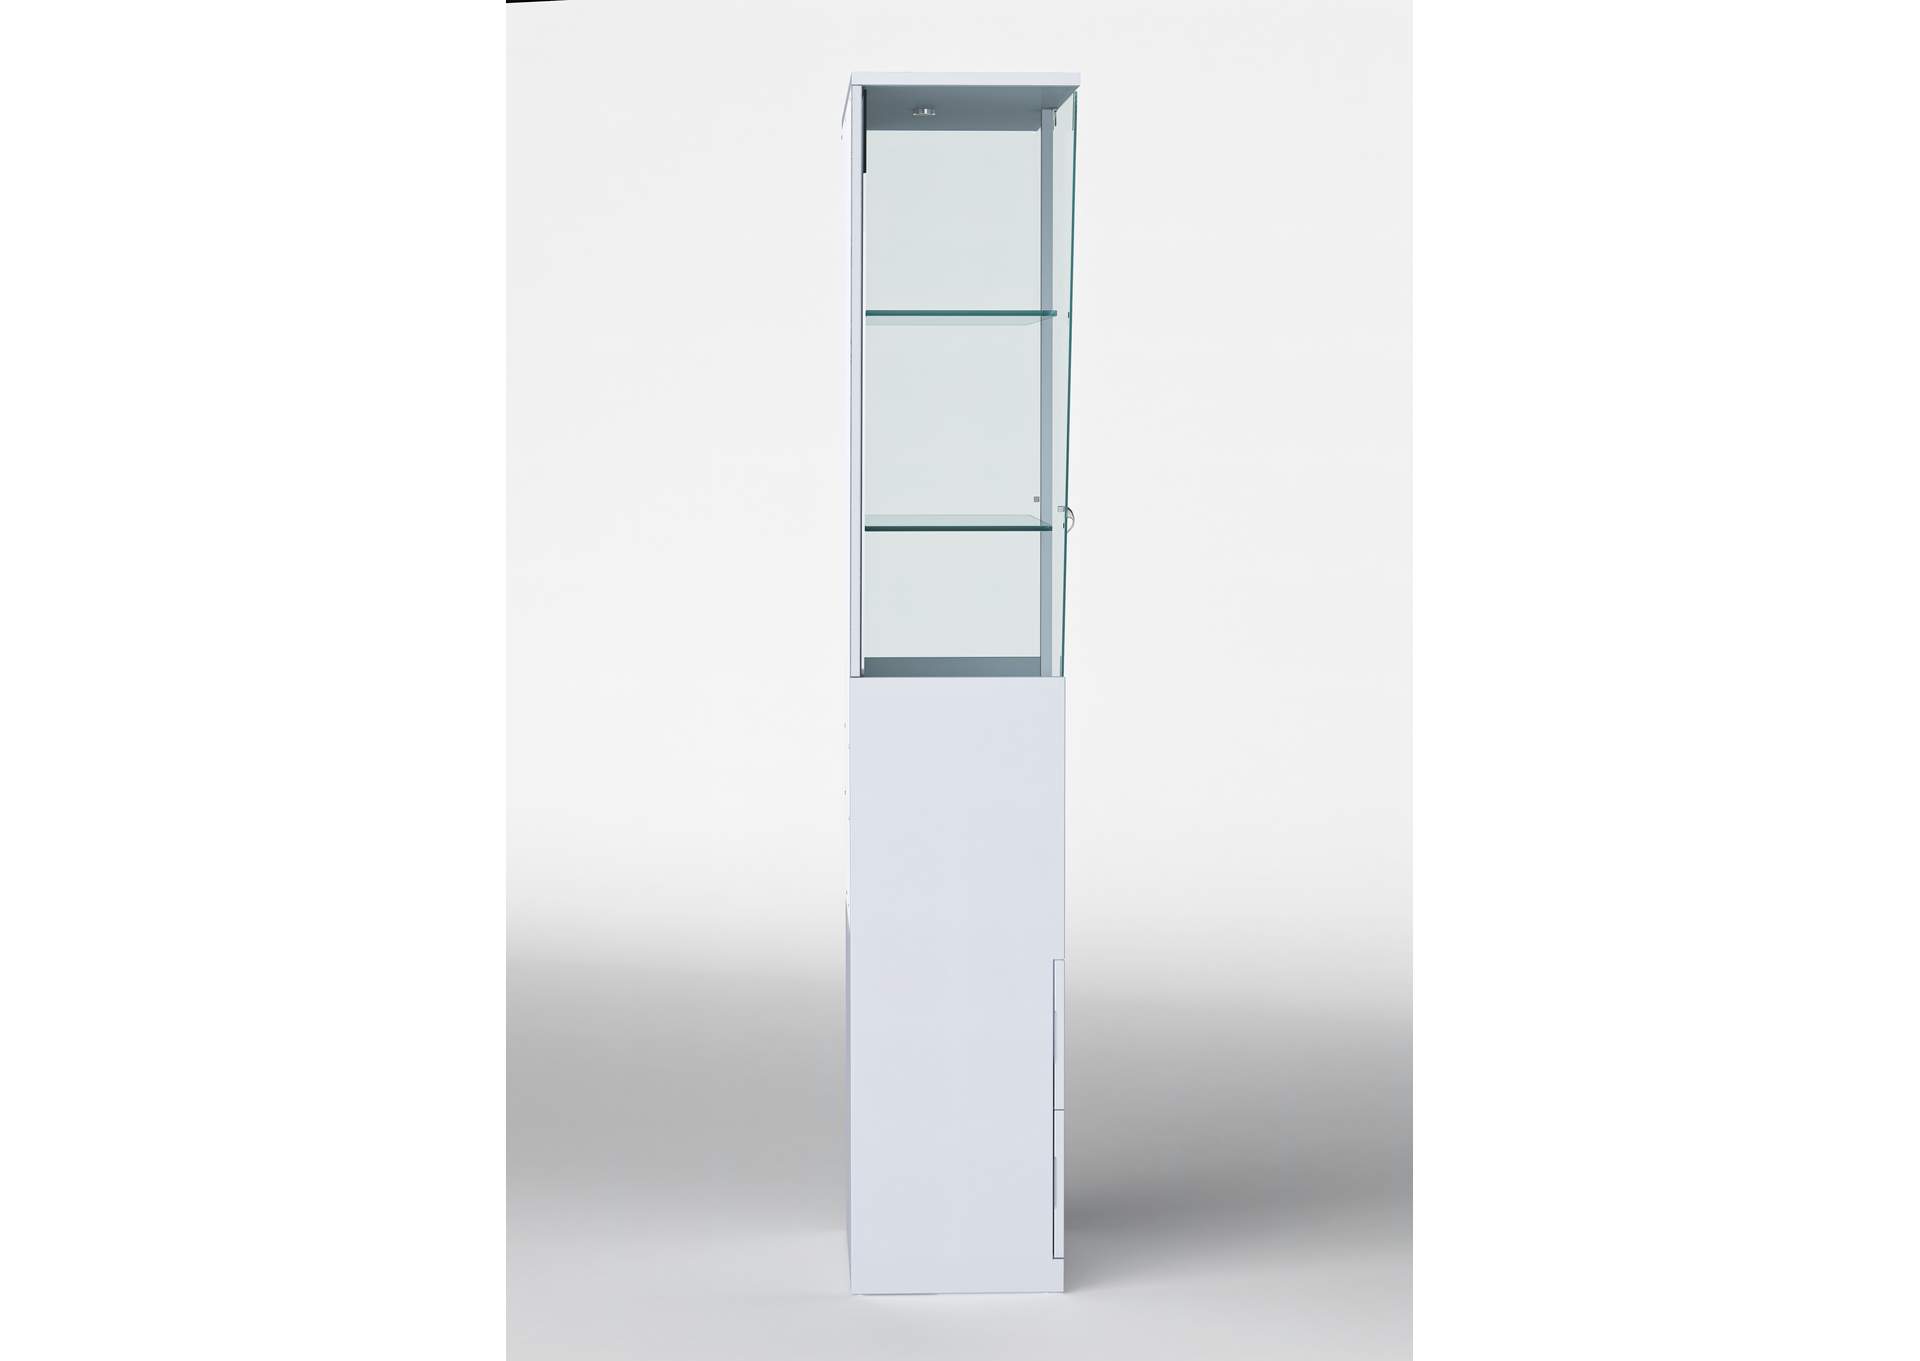 Triangular Design Curio w/ Shelves, Drawers & LED Lights,Chintaly Imports